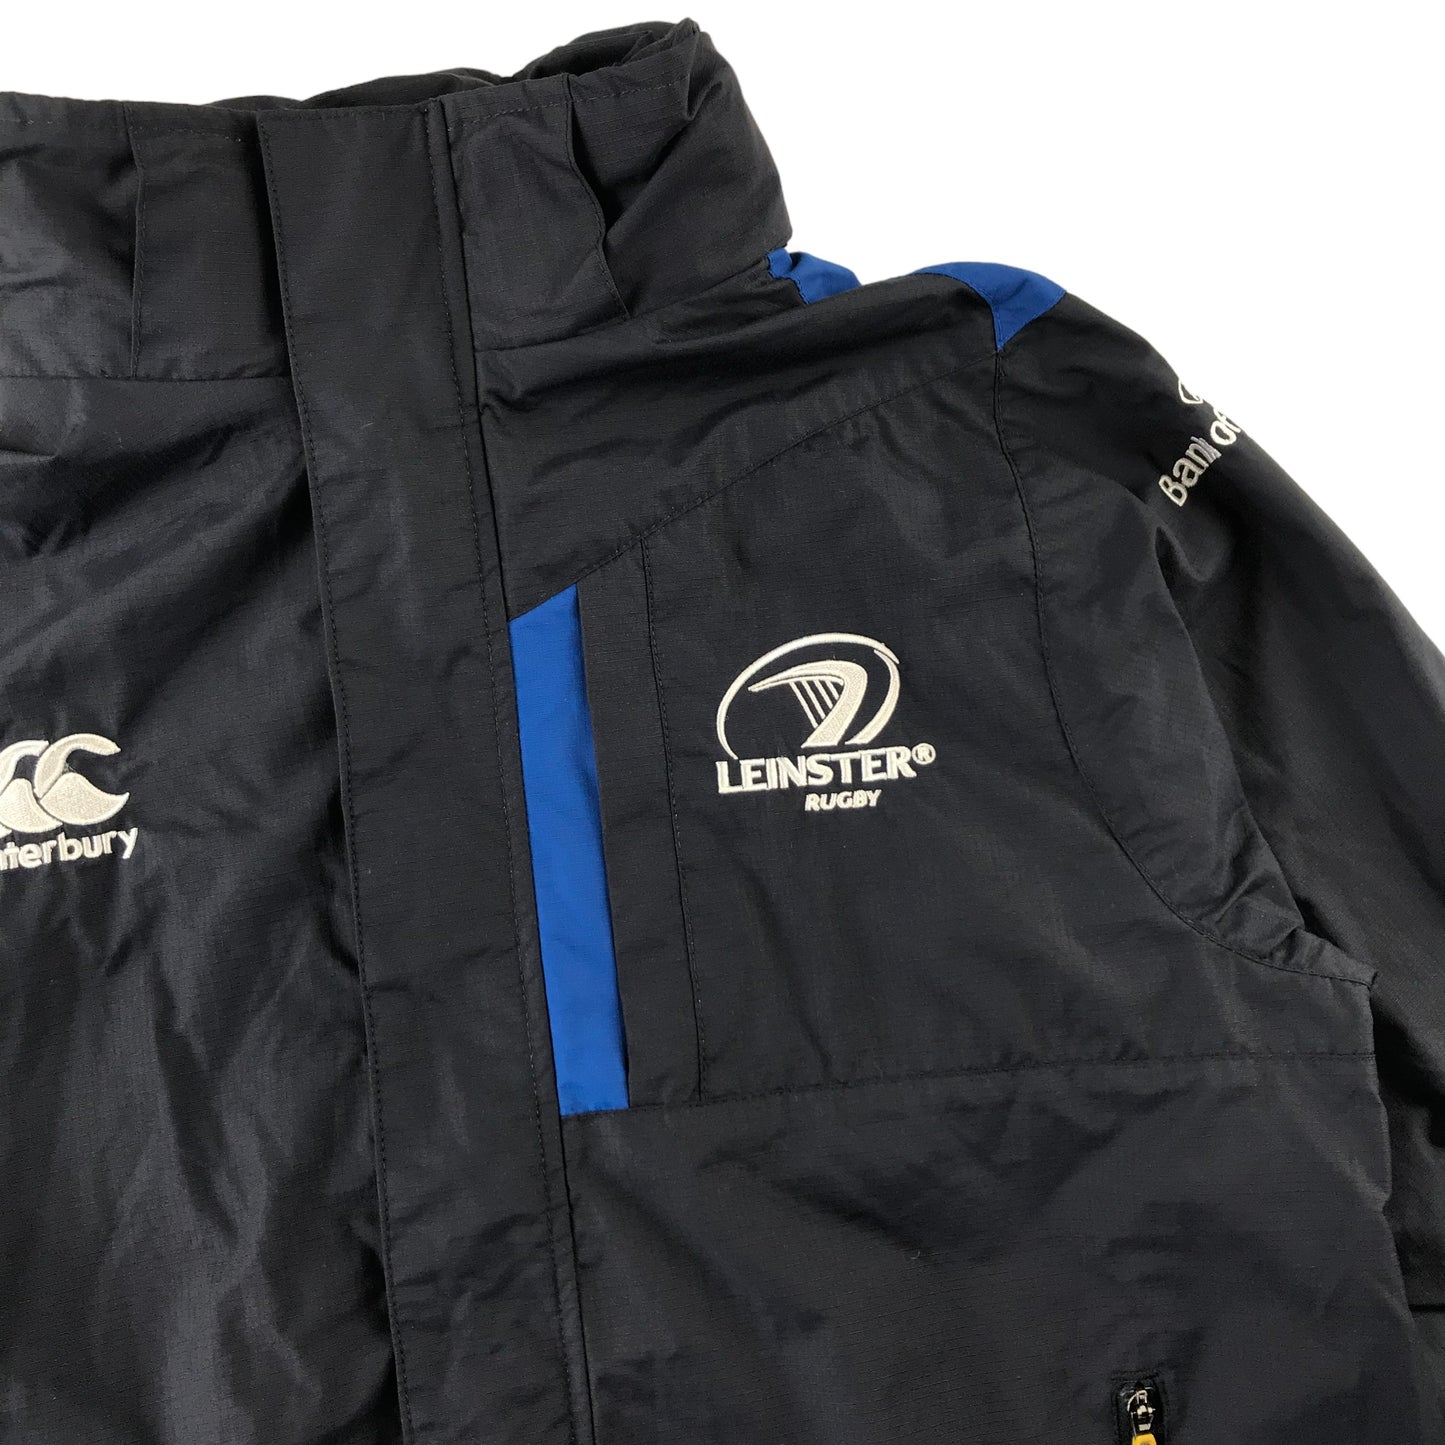 Canterbury light jacket 10 years navy Leinster rugby mesh lined